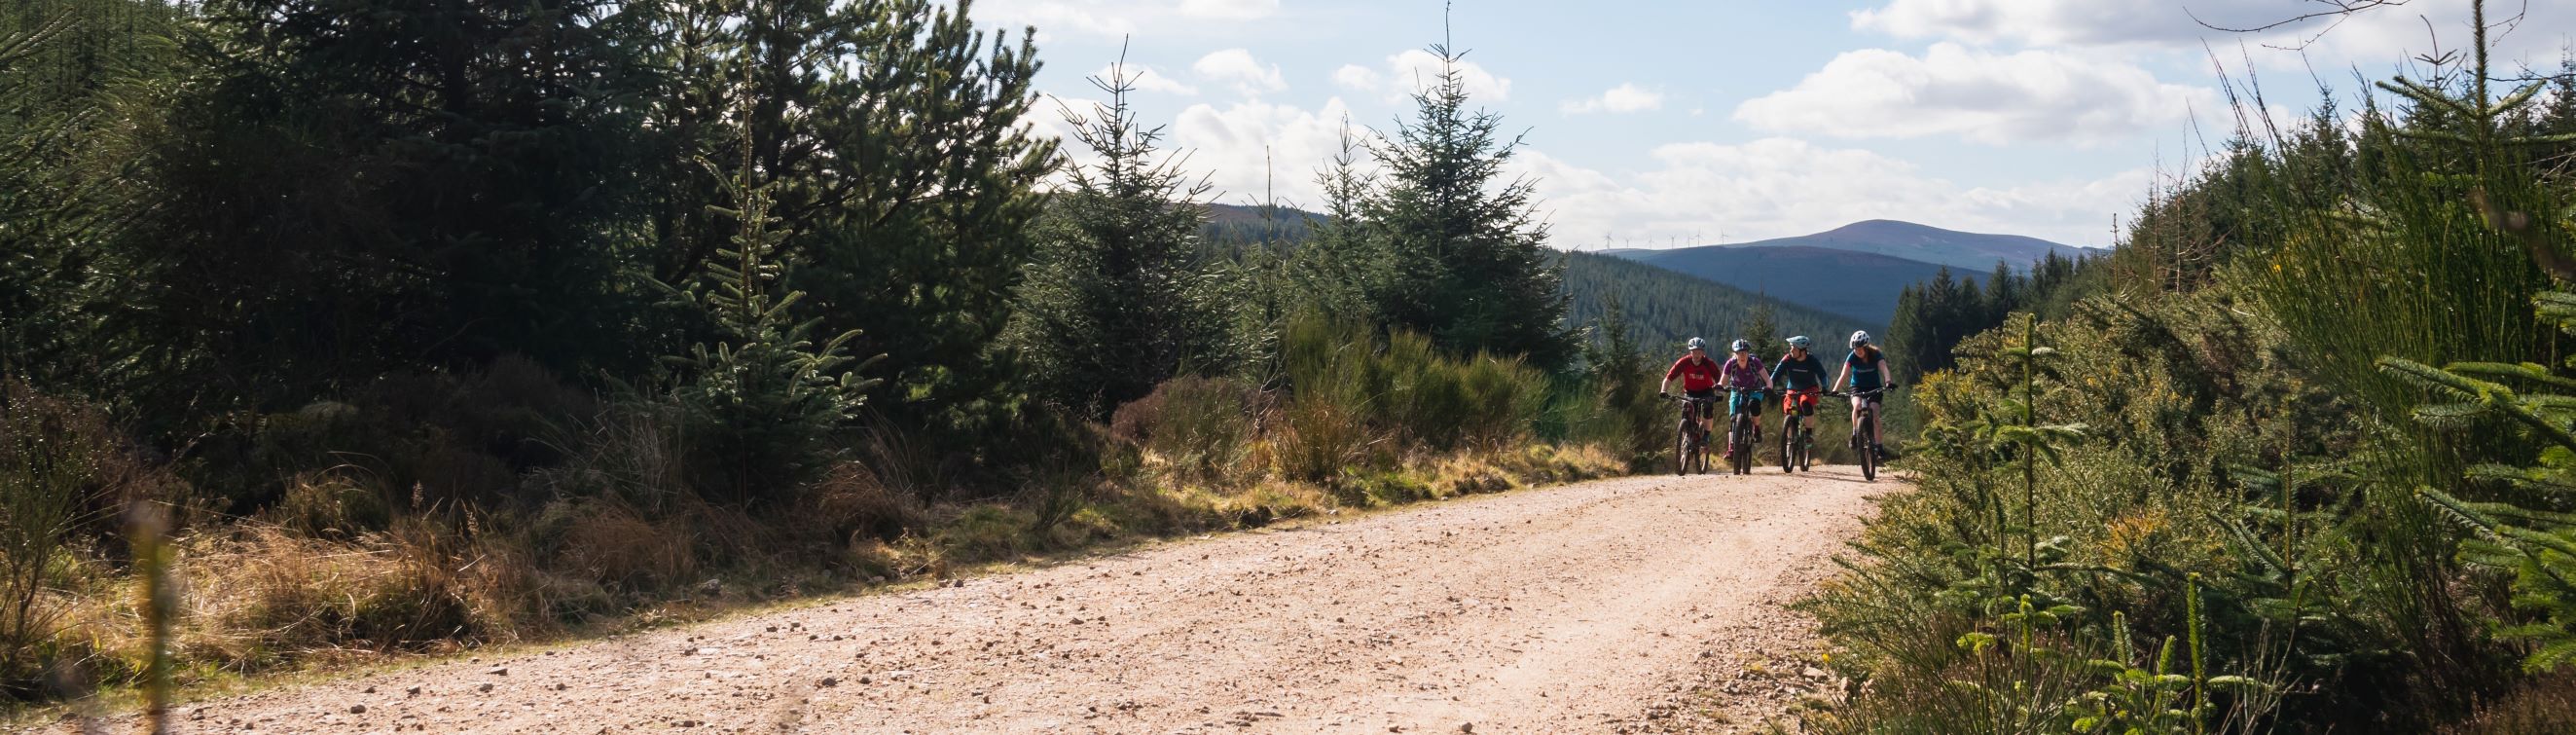 Mountain bikers on a forest road in Aberdeenshire